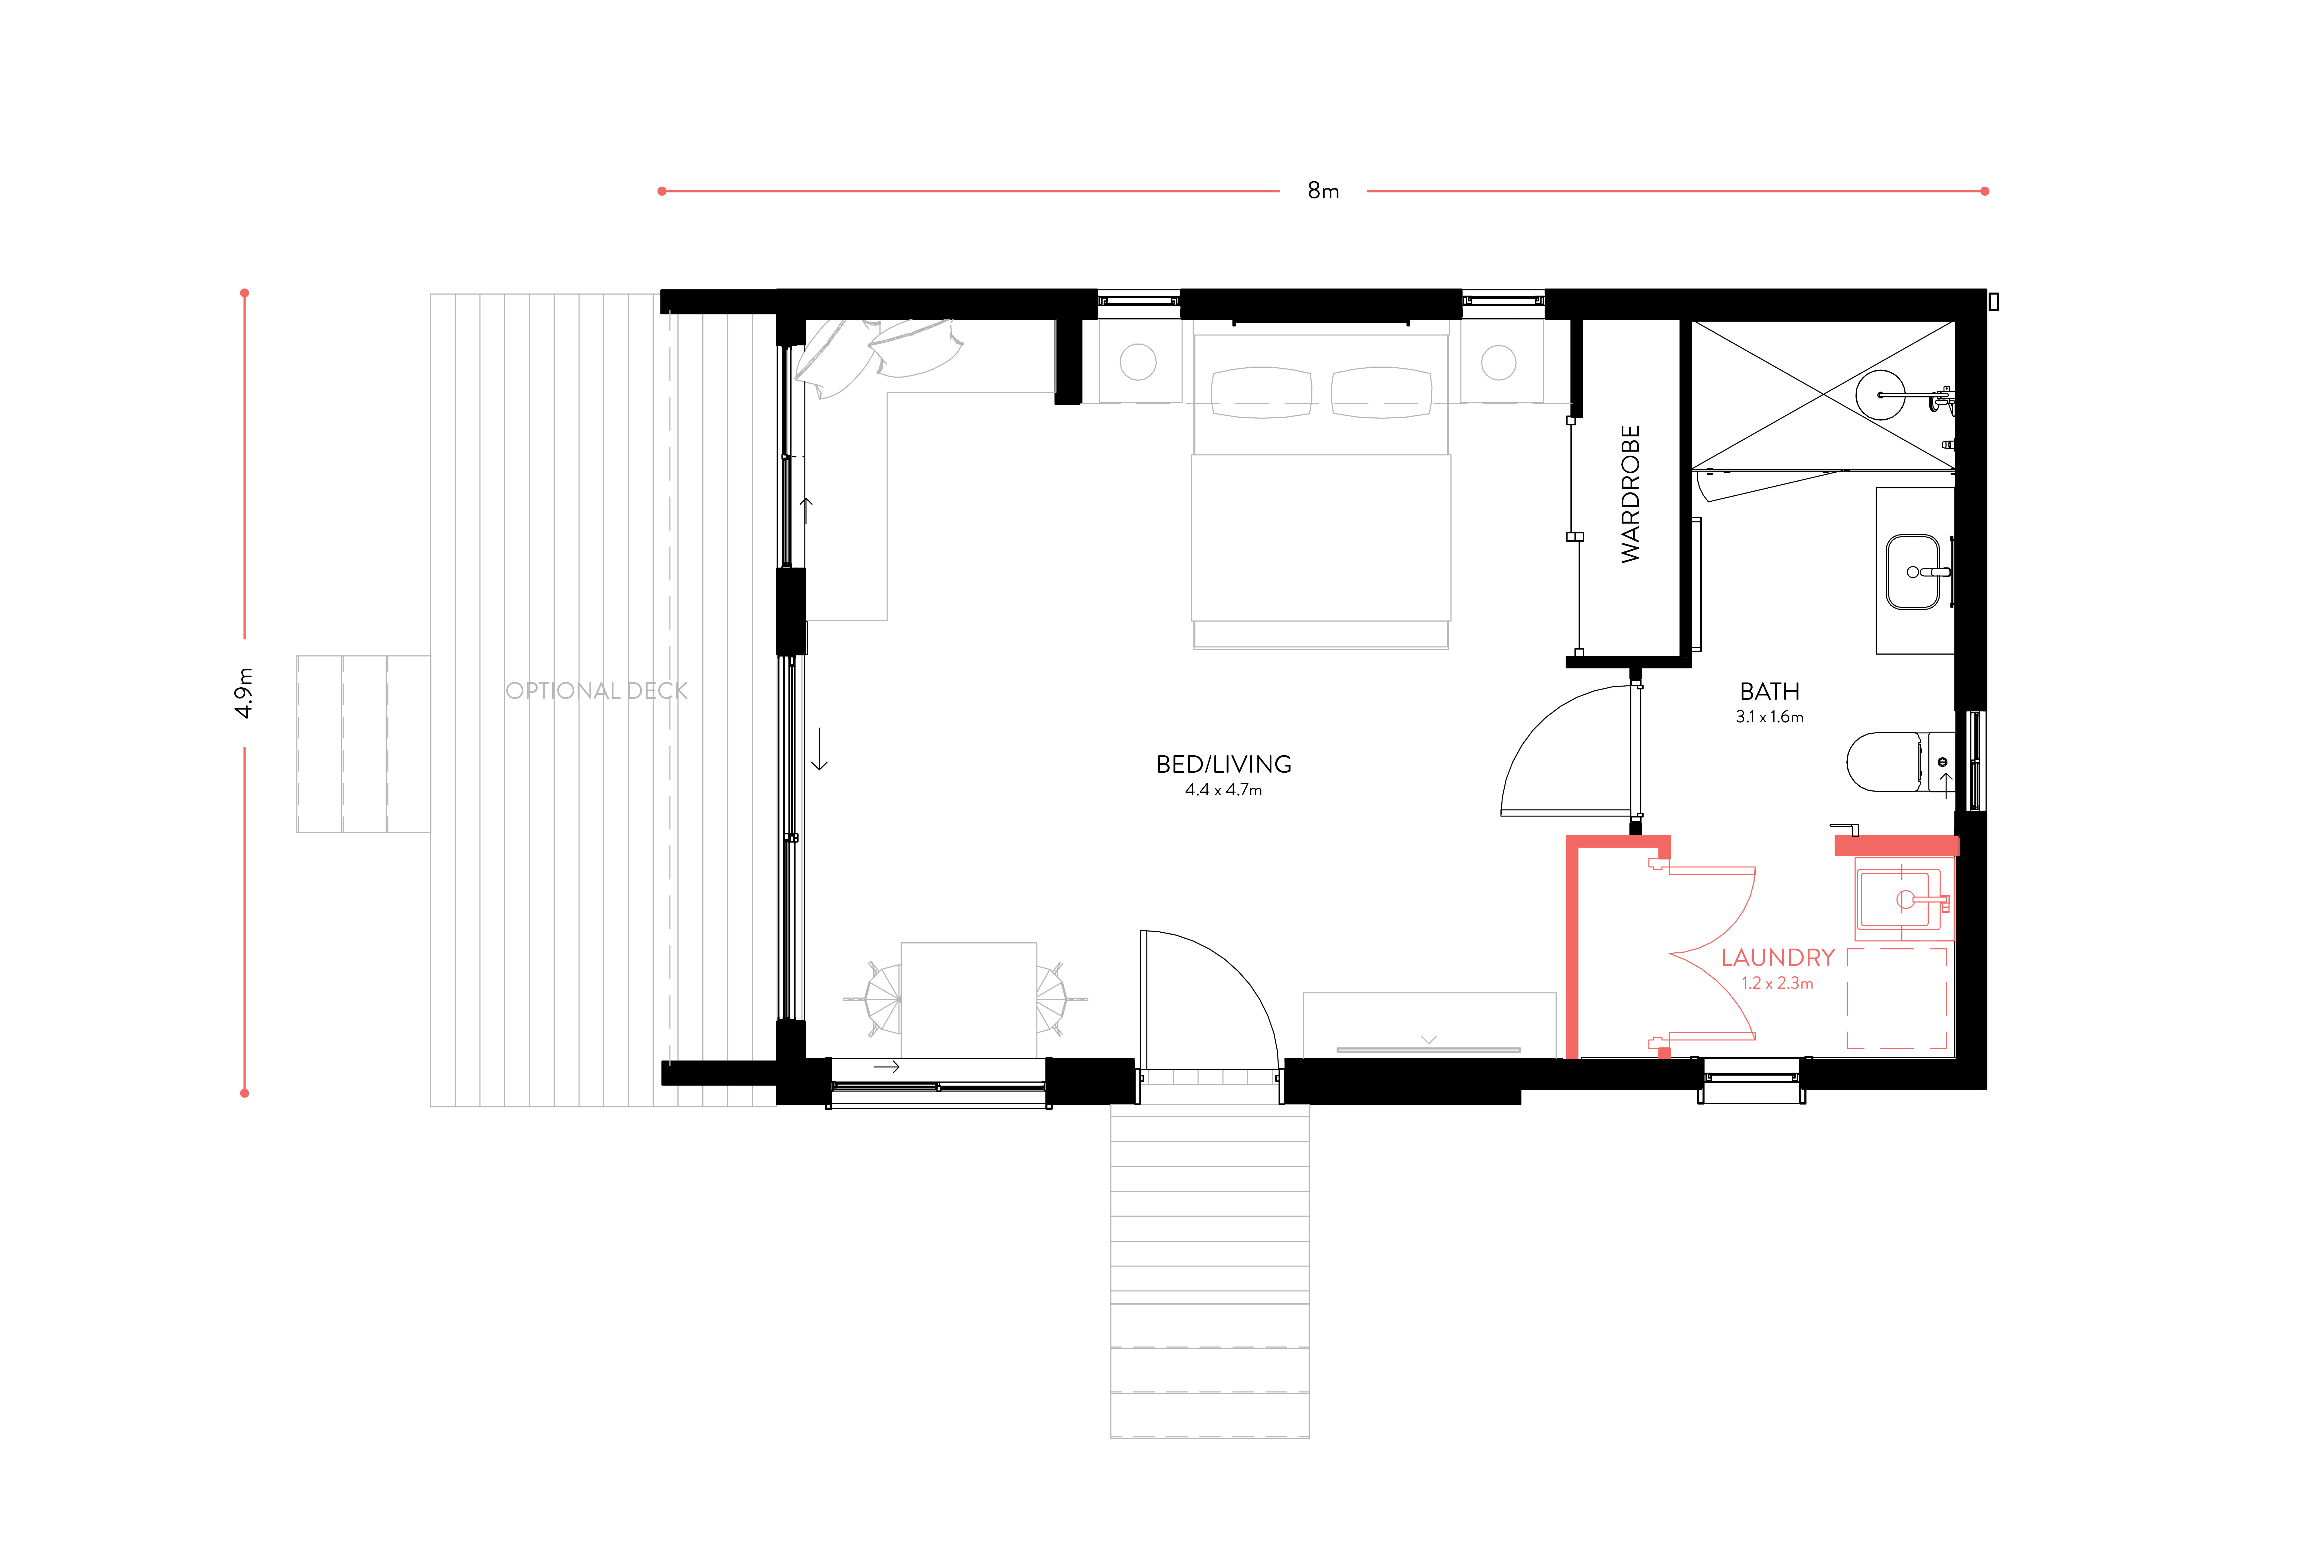 Floorplan of PLACEit modular home - Hobby with laundry